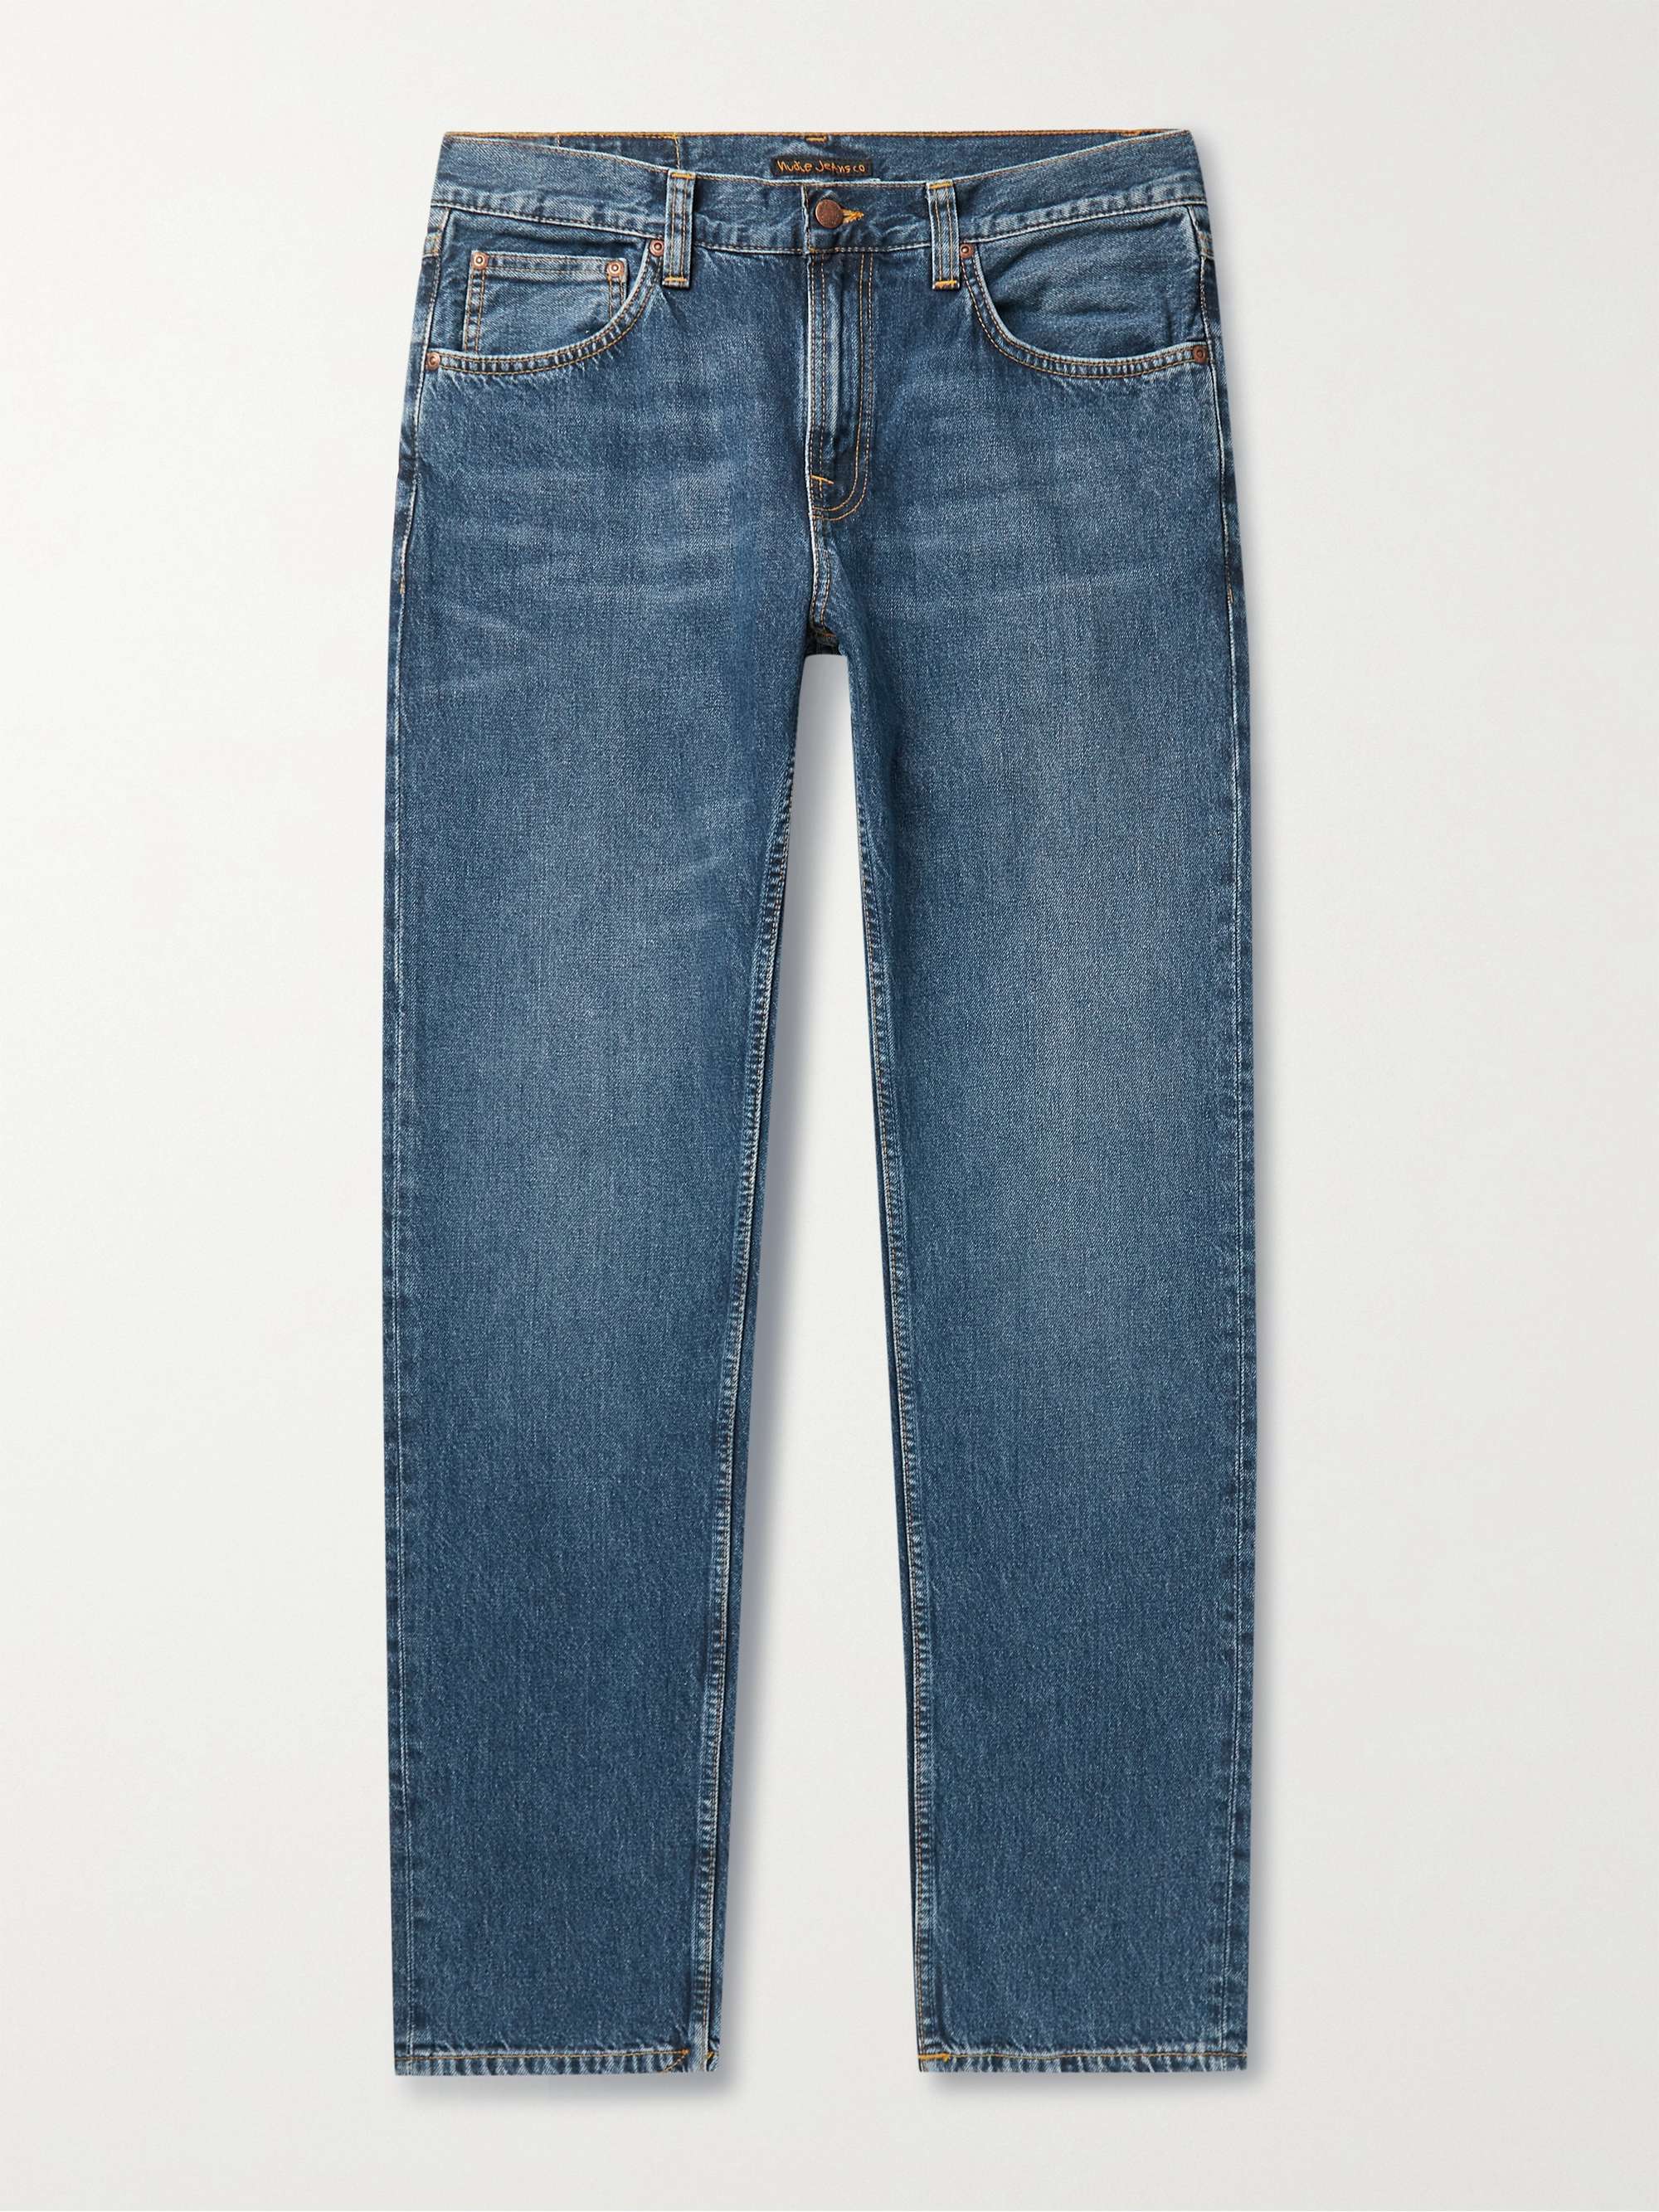 NUDIE JEANS Gritty Jackson Straight-Leg Organic Jeans